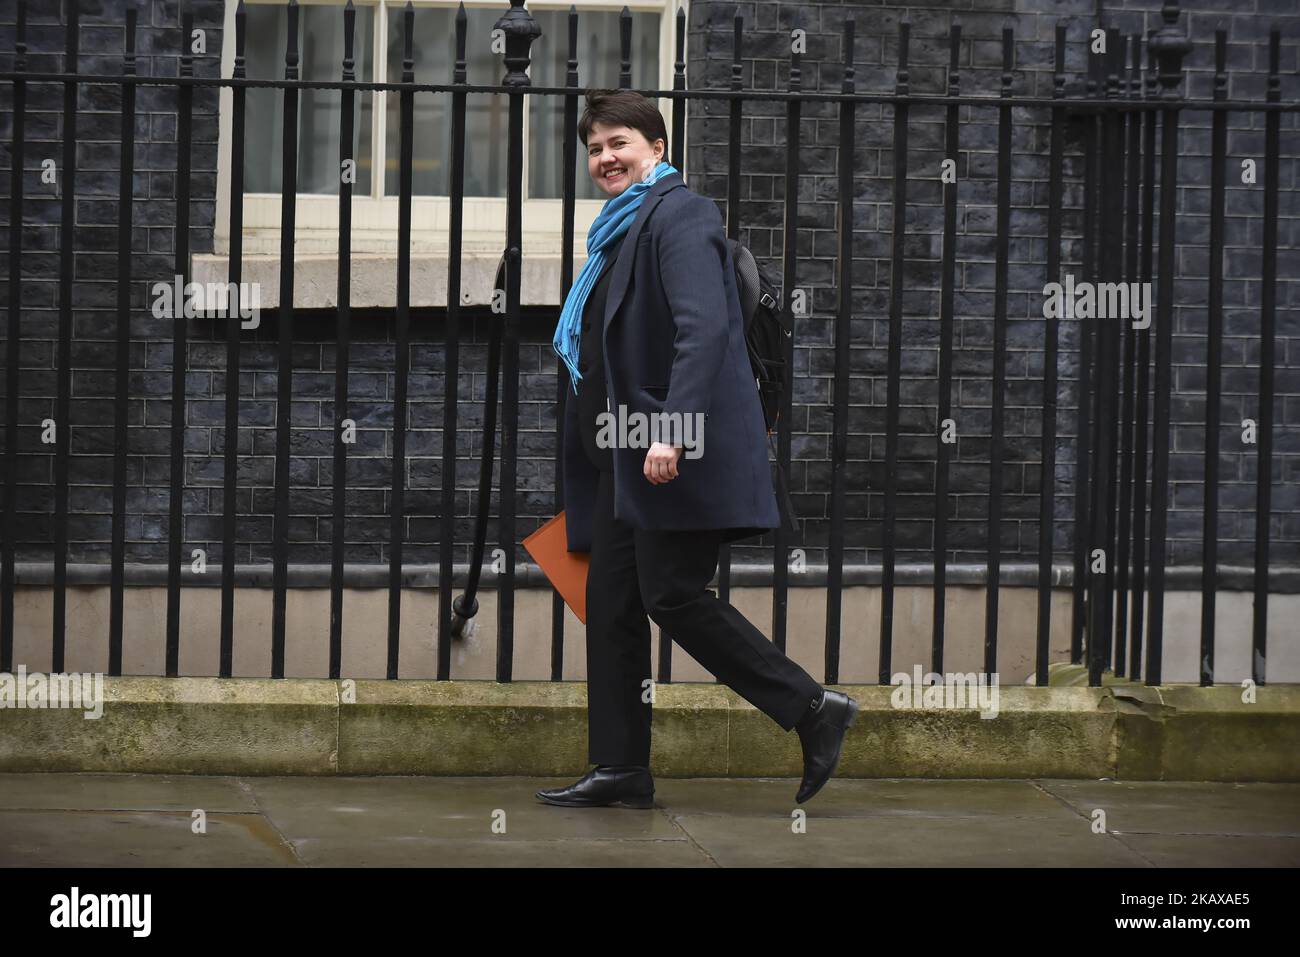 Ruth Davidson, leader of the Scottish Conservatives arrives at 10 Downing Street, London on March 27, 2018. Prime Minister Theresa May is facing another Brexit hurdle after the opposition Labour Party announced its pushing for a legal commitment to avoid a hard border with Ireland after Britain leaves the European Union. The Migration Advisory Committee (MAC) said businesses are concerned about their ability to recruit workers from the EU after Britain leaves the EU. UK employers also see EU workers as 'more reliable' and eager than their British counterparts, the report said. (Photo by Albert Stock Photo